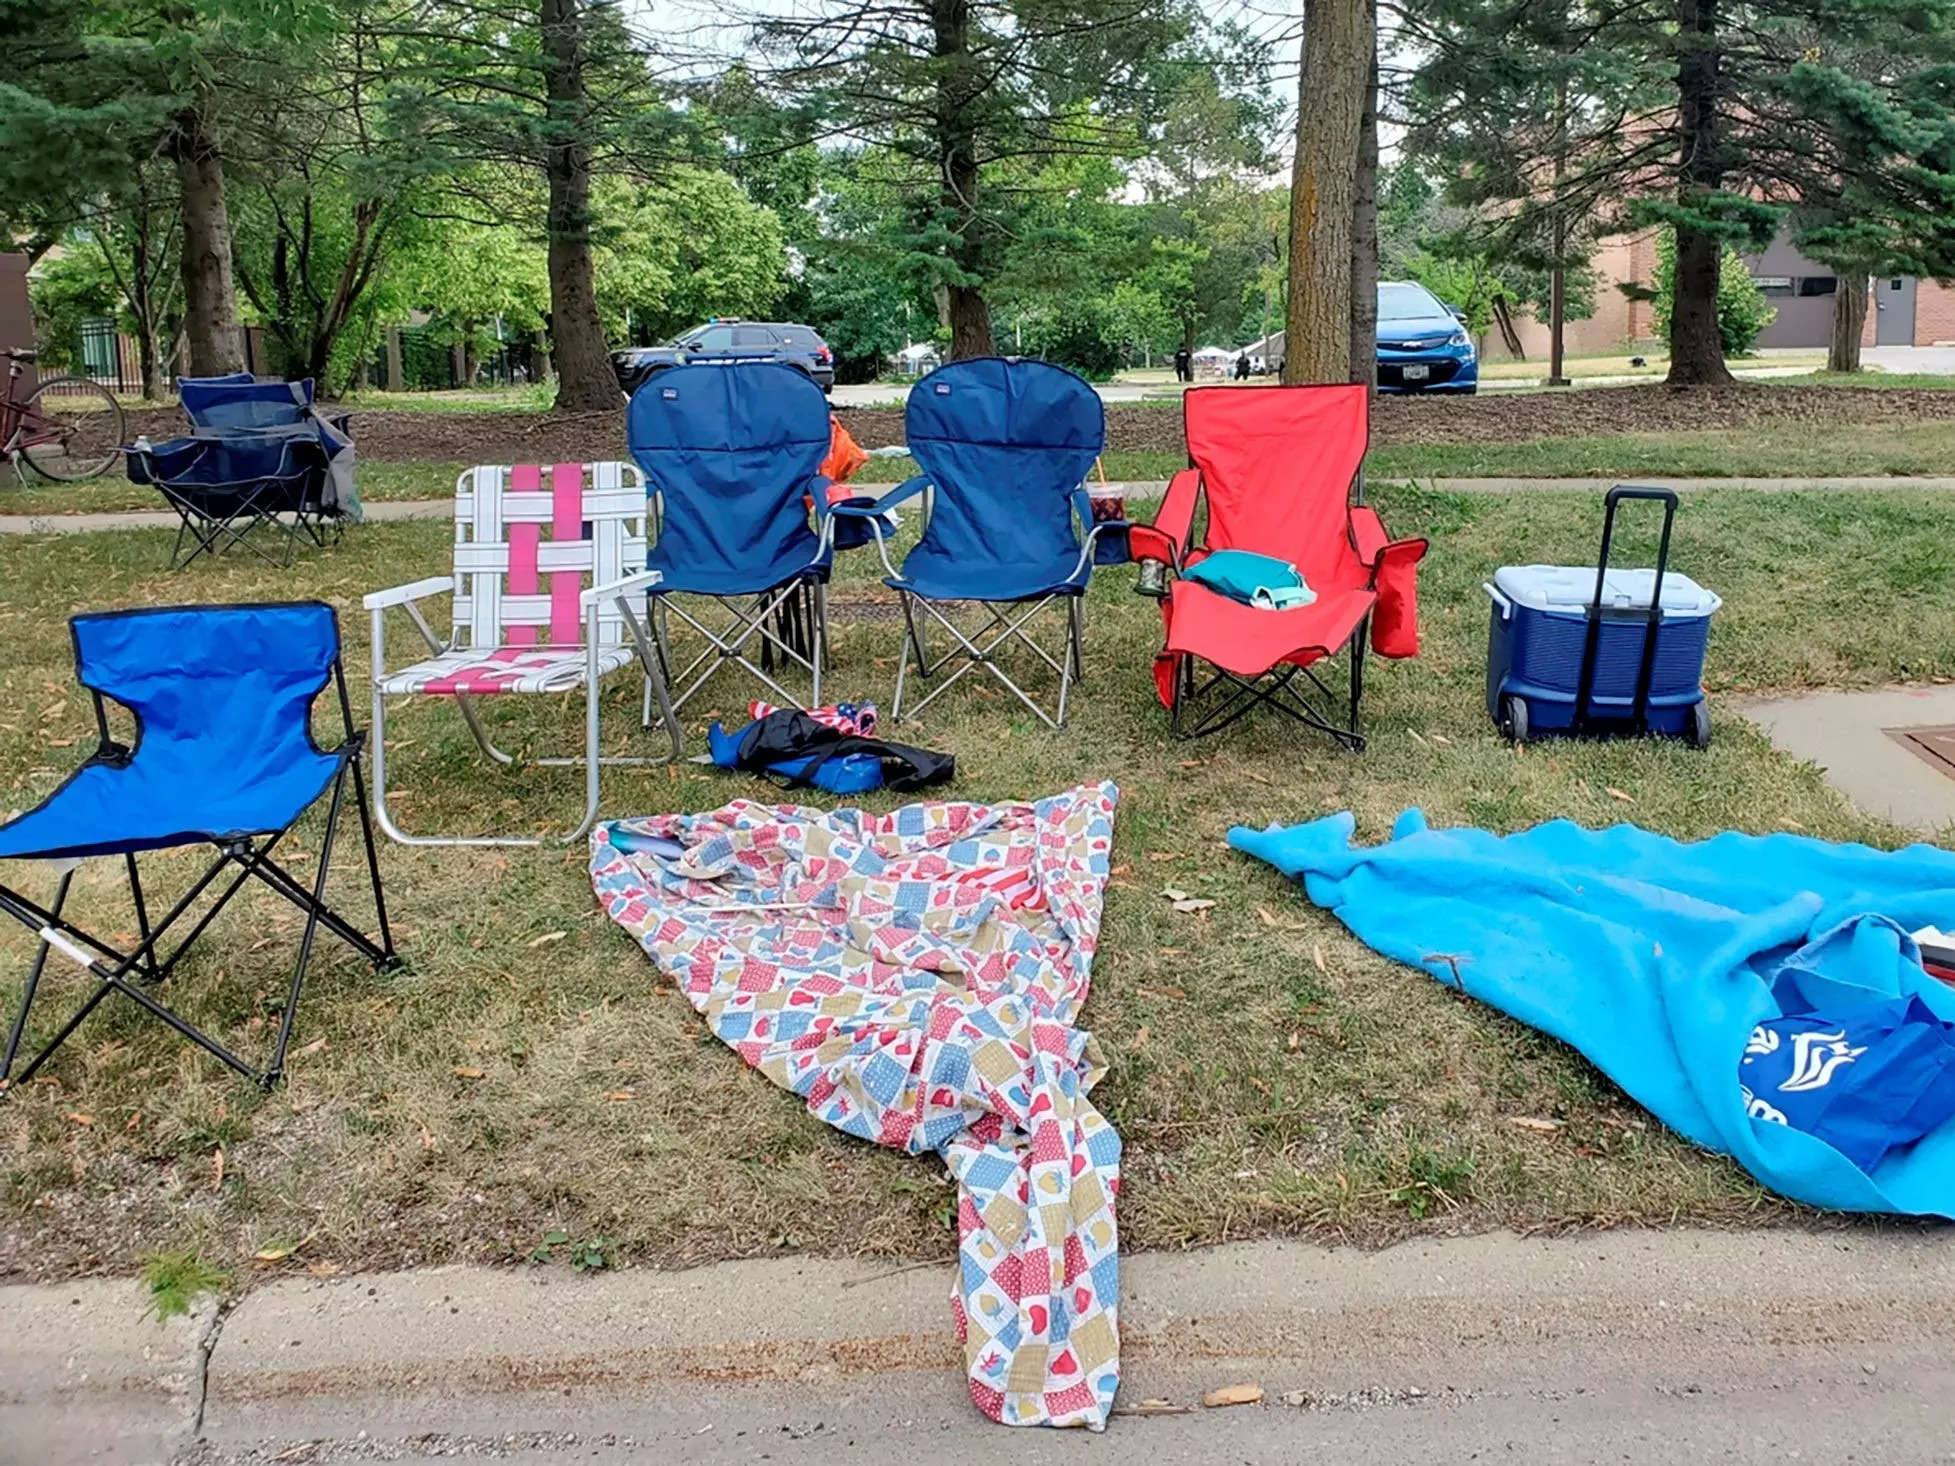 empty lawn chairs and blankets with cooler in grass beside street